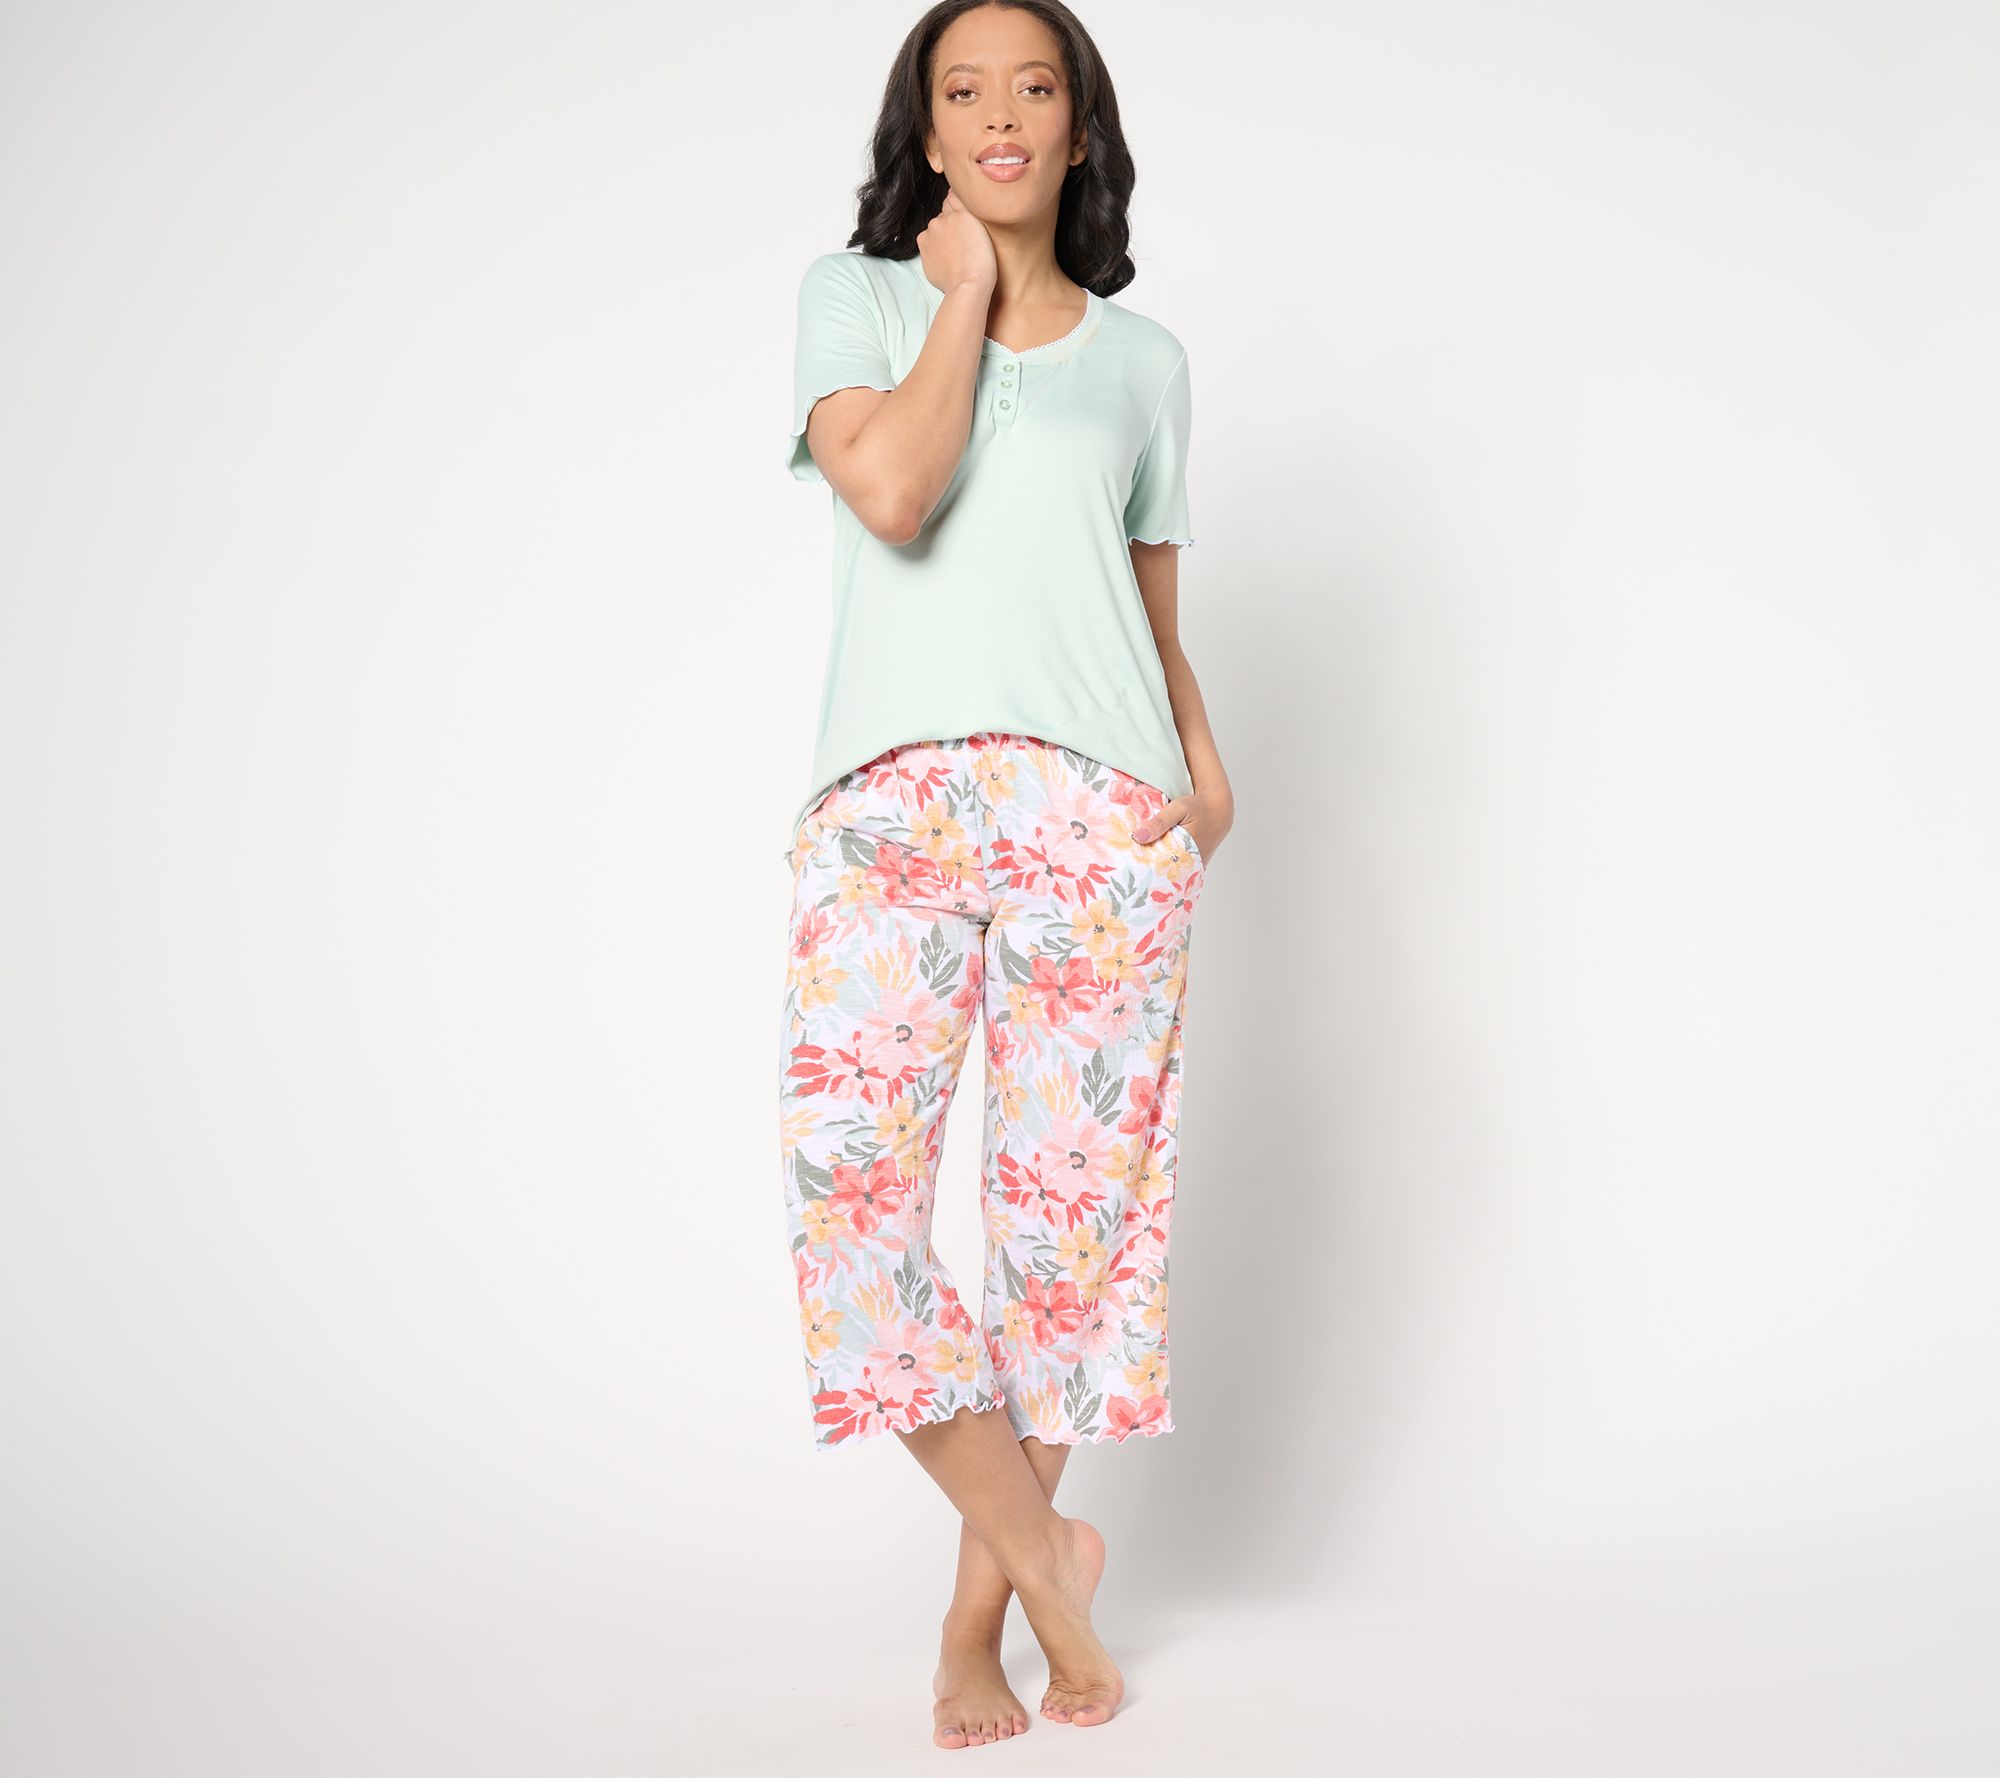 Women's Cuddl Duds Henley Pajama Top and Banded Bottom Pajama